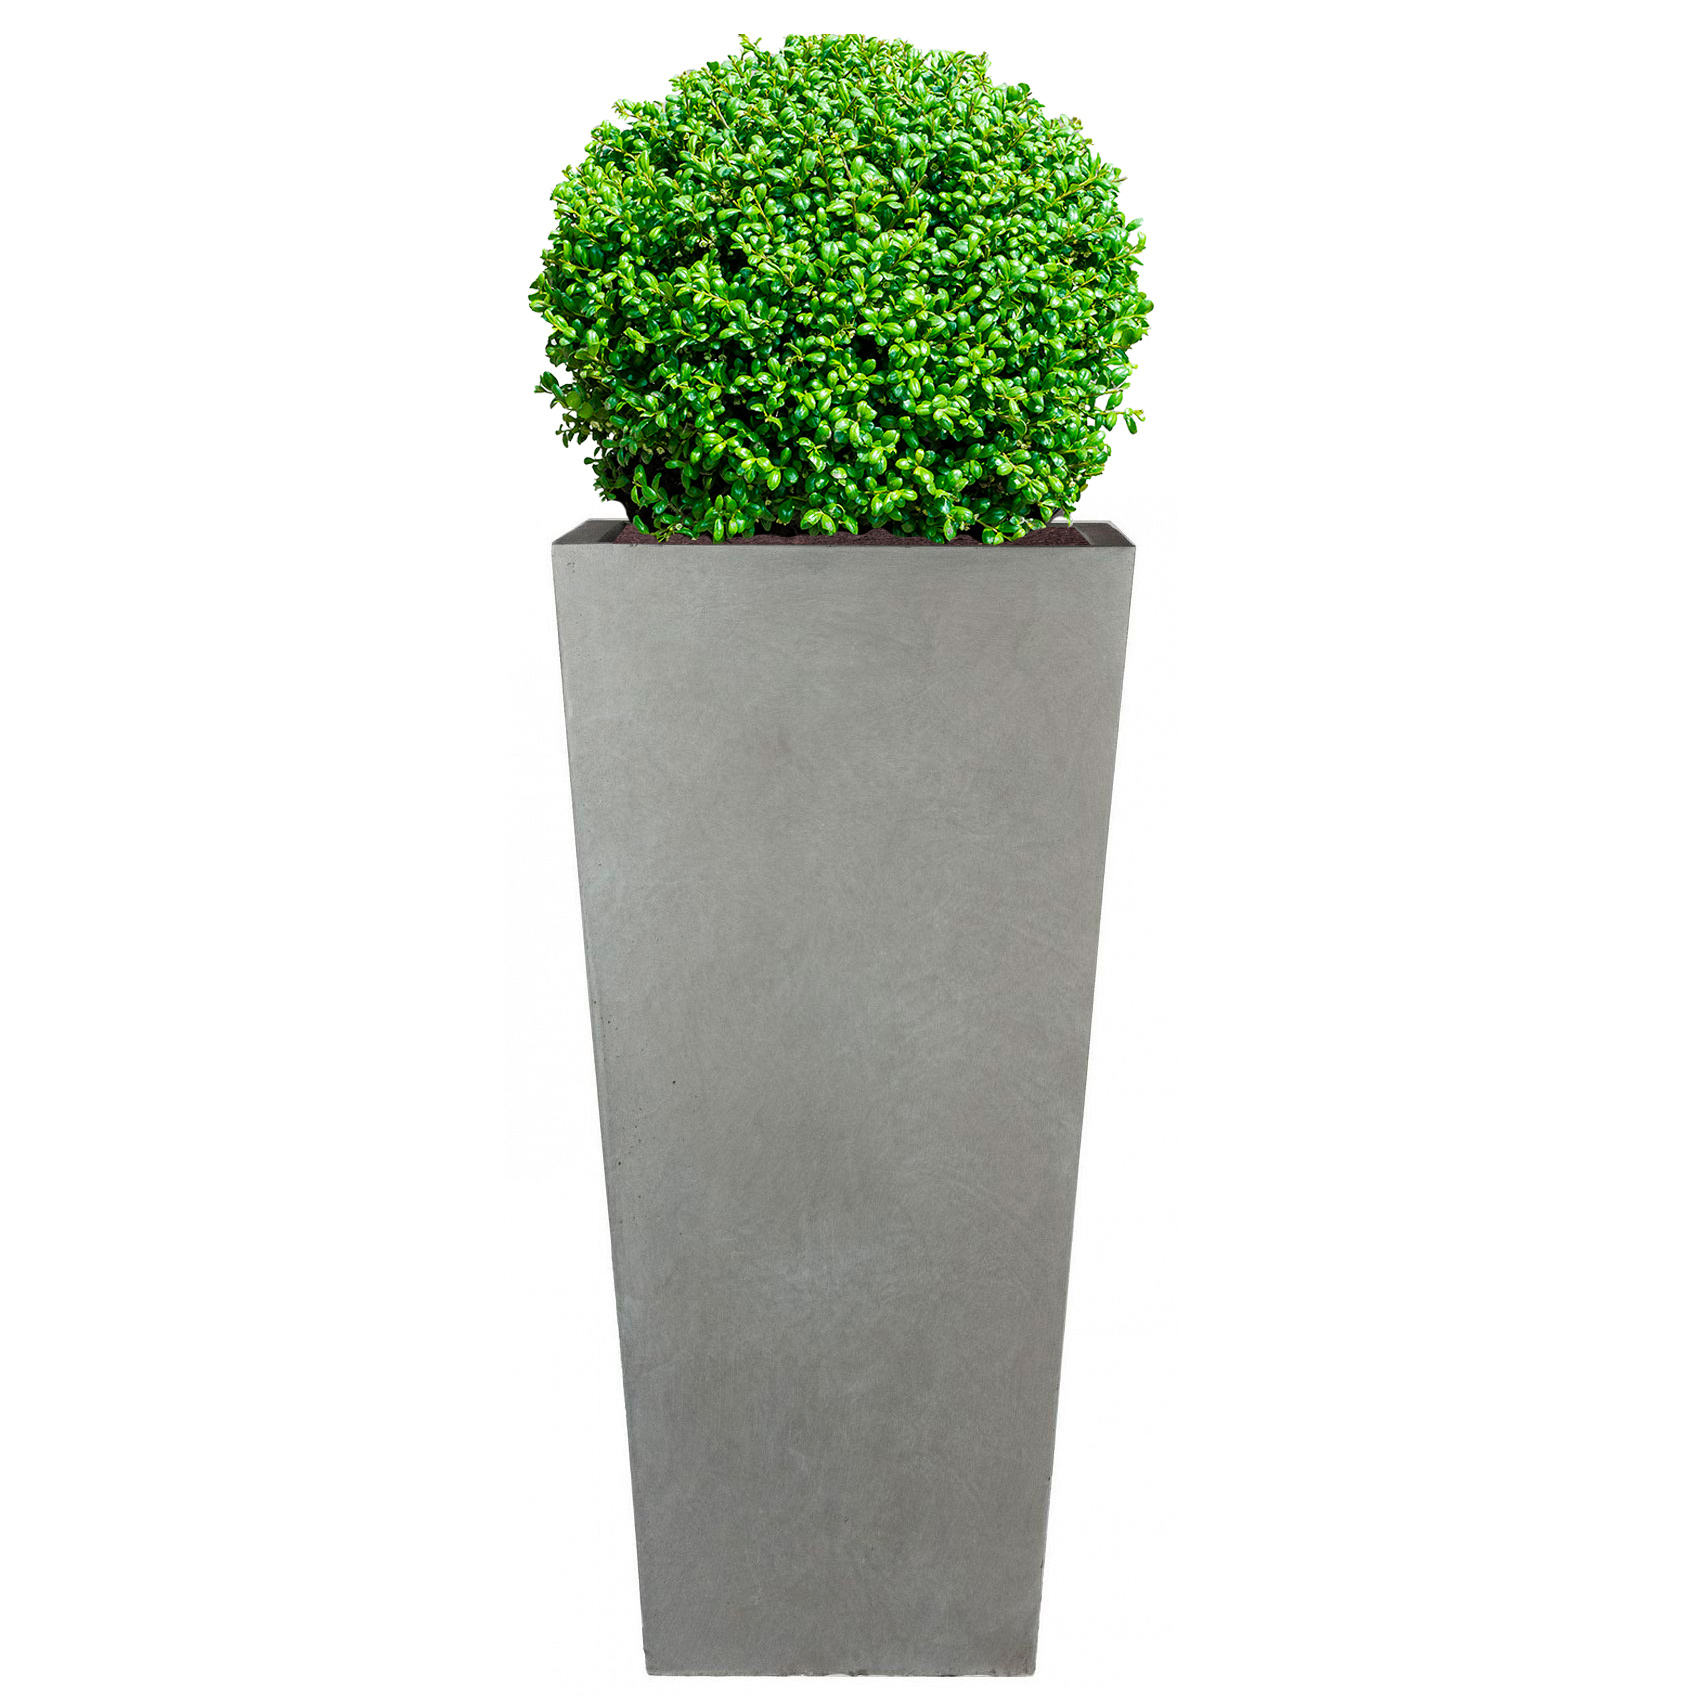 Tall Tapered Contemporary Grey Light Concrete Planter H65 L32 W32 cm, 67 ltrs Cap.